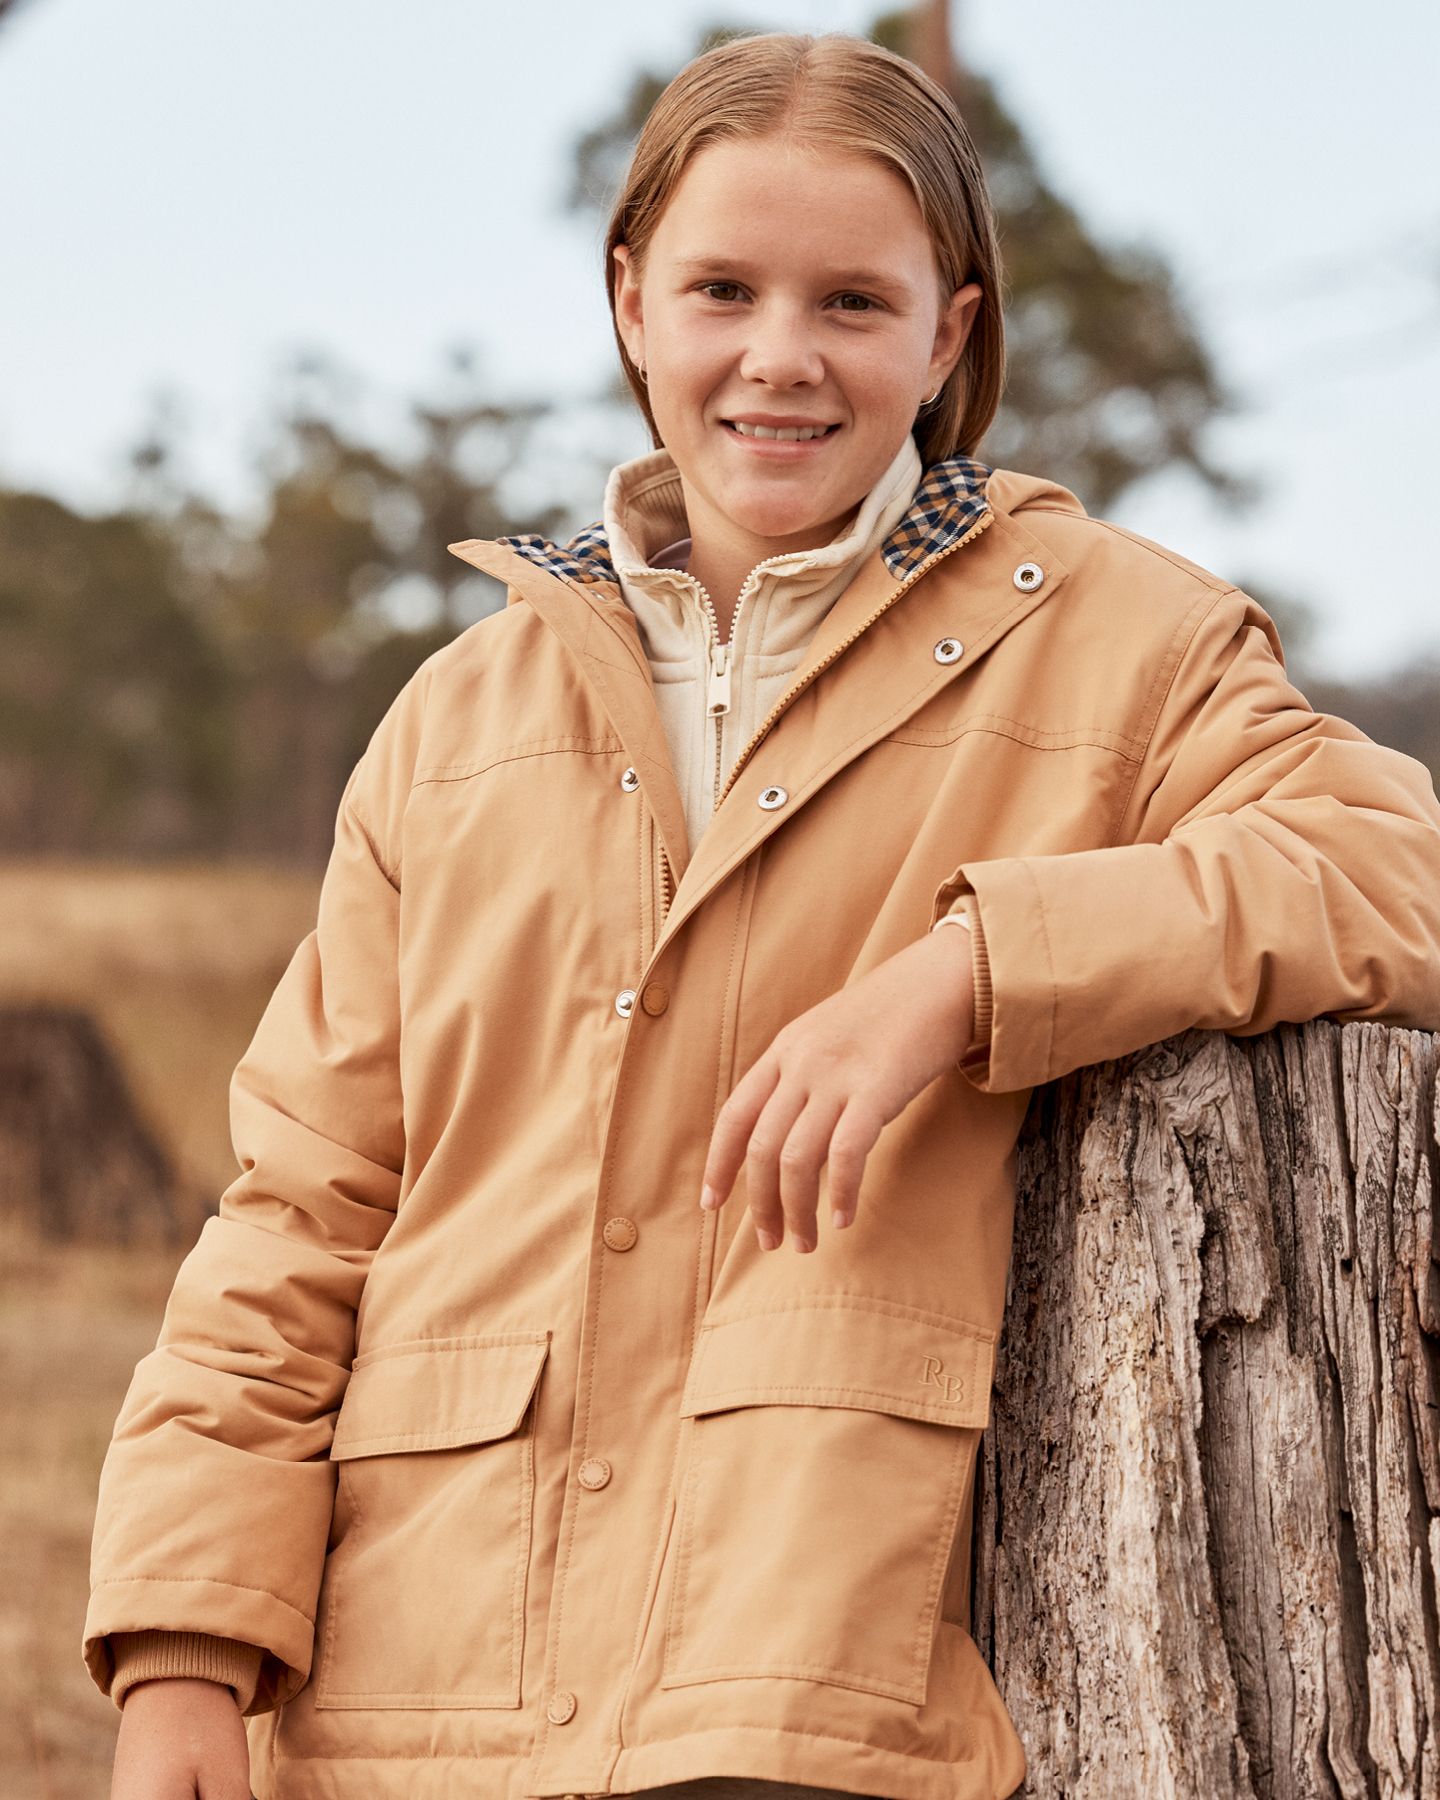 New Arrivals | Teens & Kids Anorak

Keep them warm & dry with our water resi...

Shop Teens & Kids New Jackets via the link in bio. 

#RBSellars